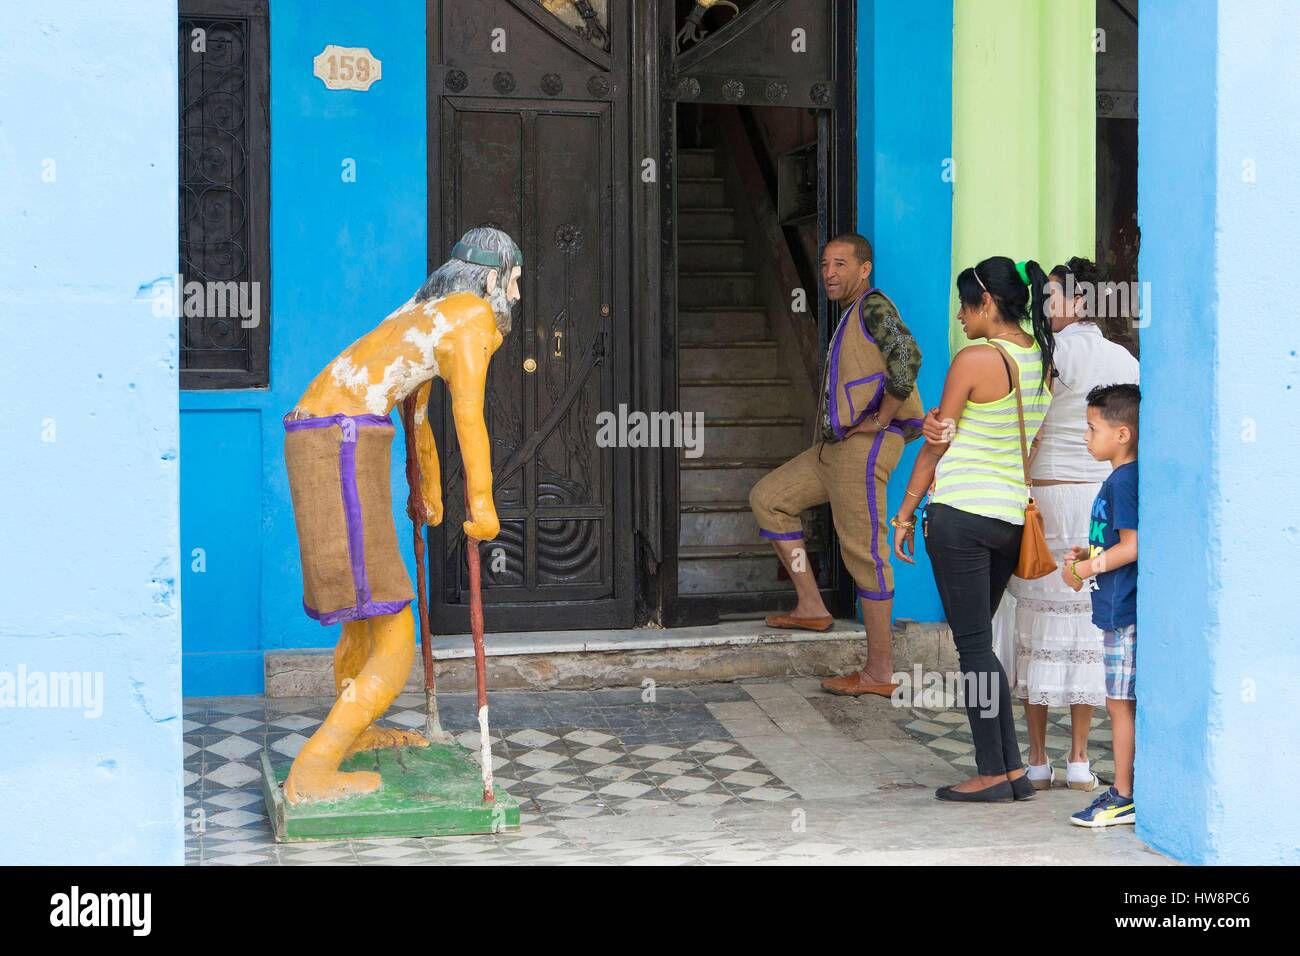 Cuba, Ciudad de la Habana province, Havana, Centro Habana district, people with a statue of San Lazaro standing by the facade of a house. San Lazaro is the second most celebrated Saint in Cuba after the Virgen de la Caridad especially by Santeria believers Stock Photo